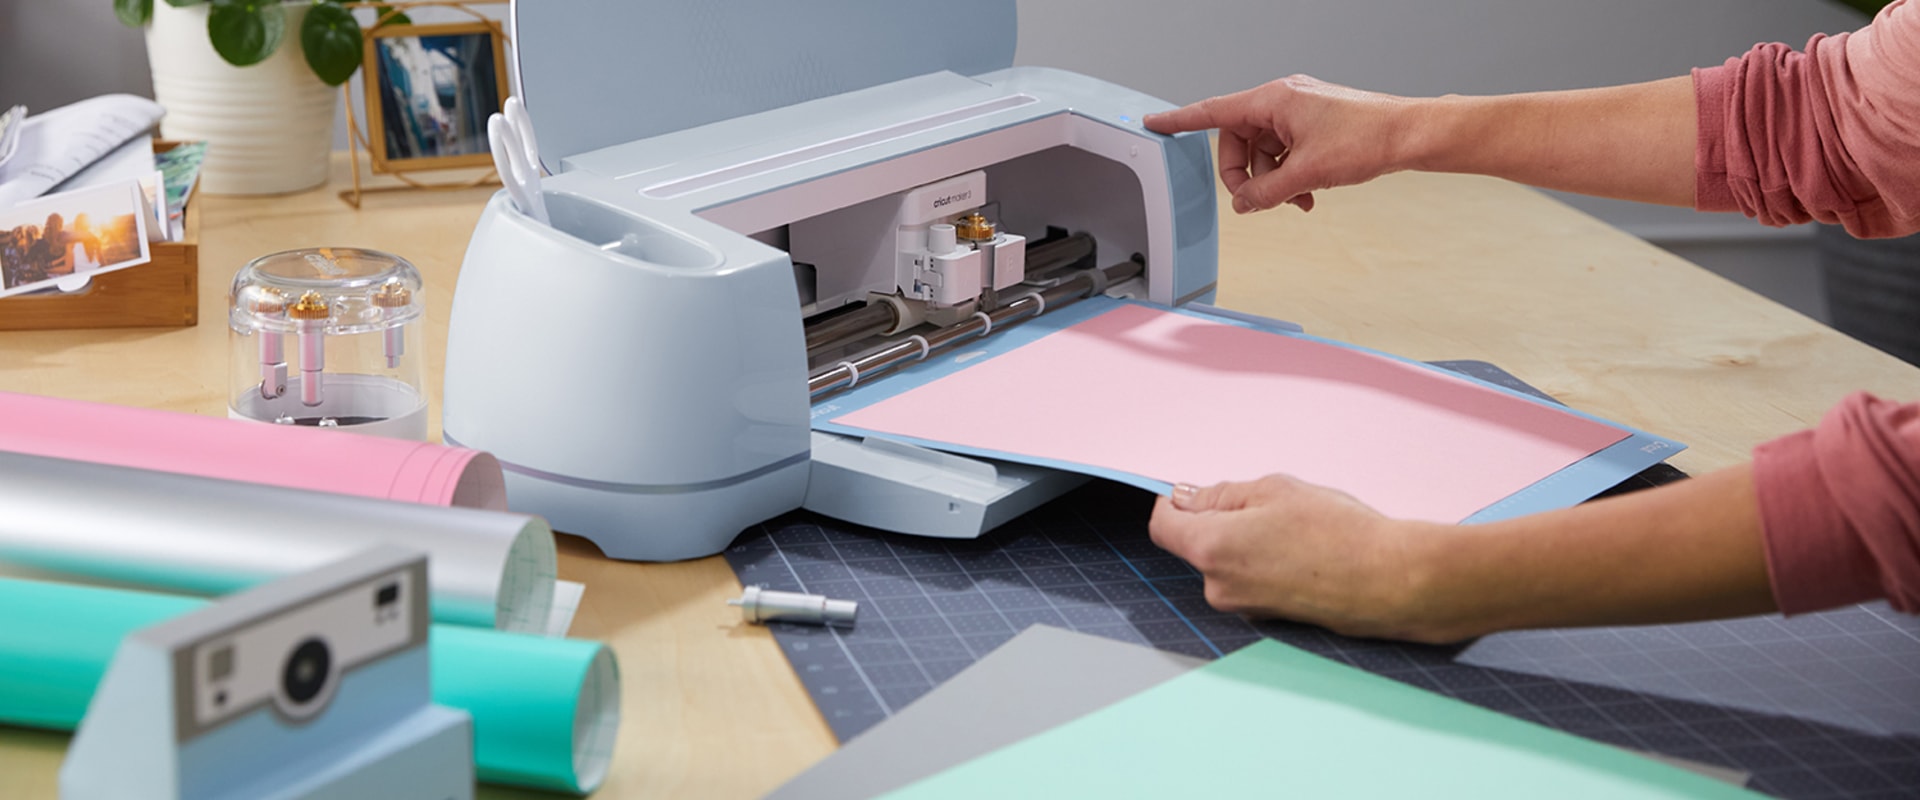 What is a cricut and what does it do?